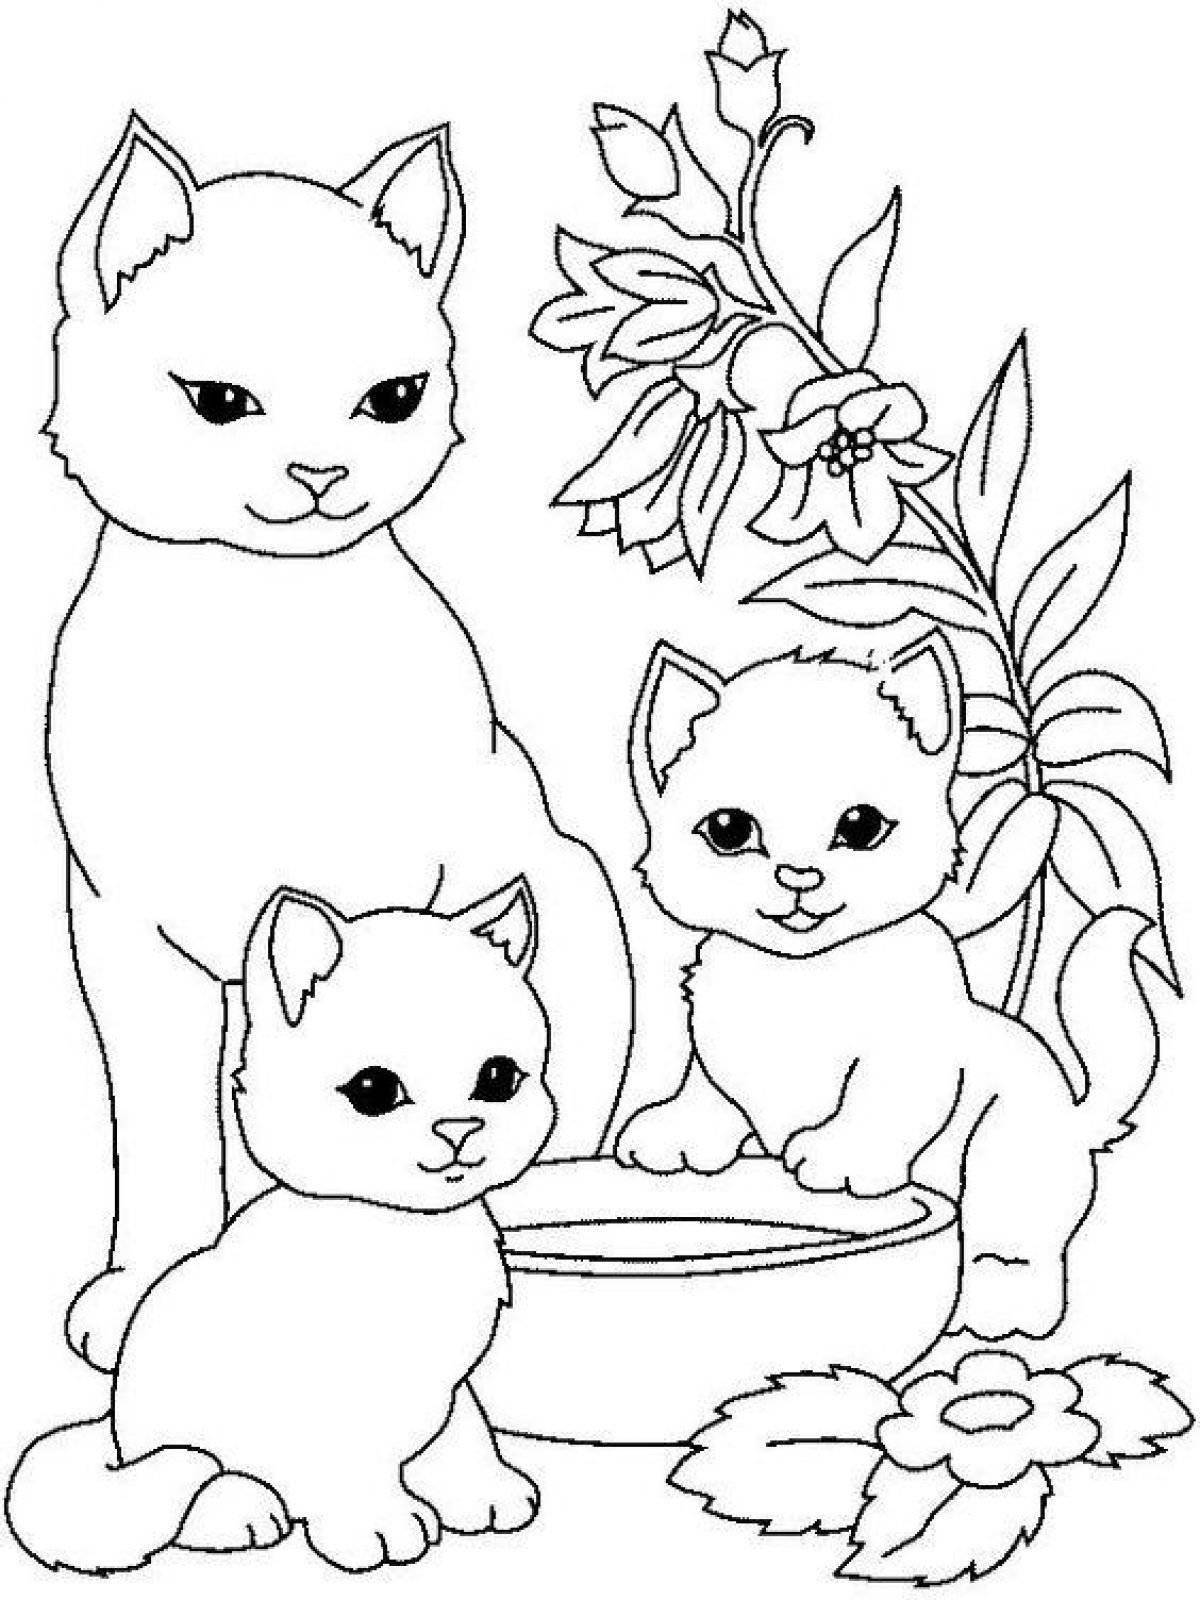 Fancy kitty coloring book for 2-3 year olds